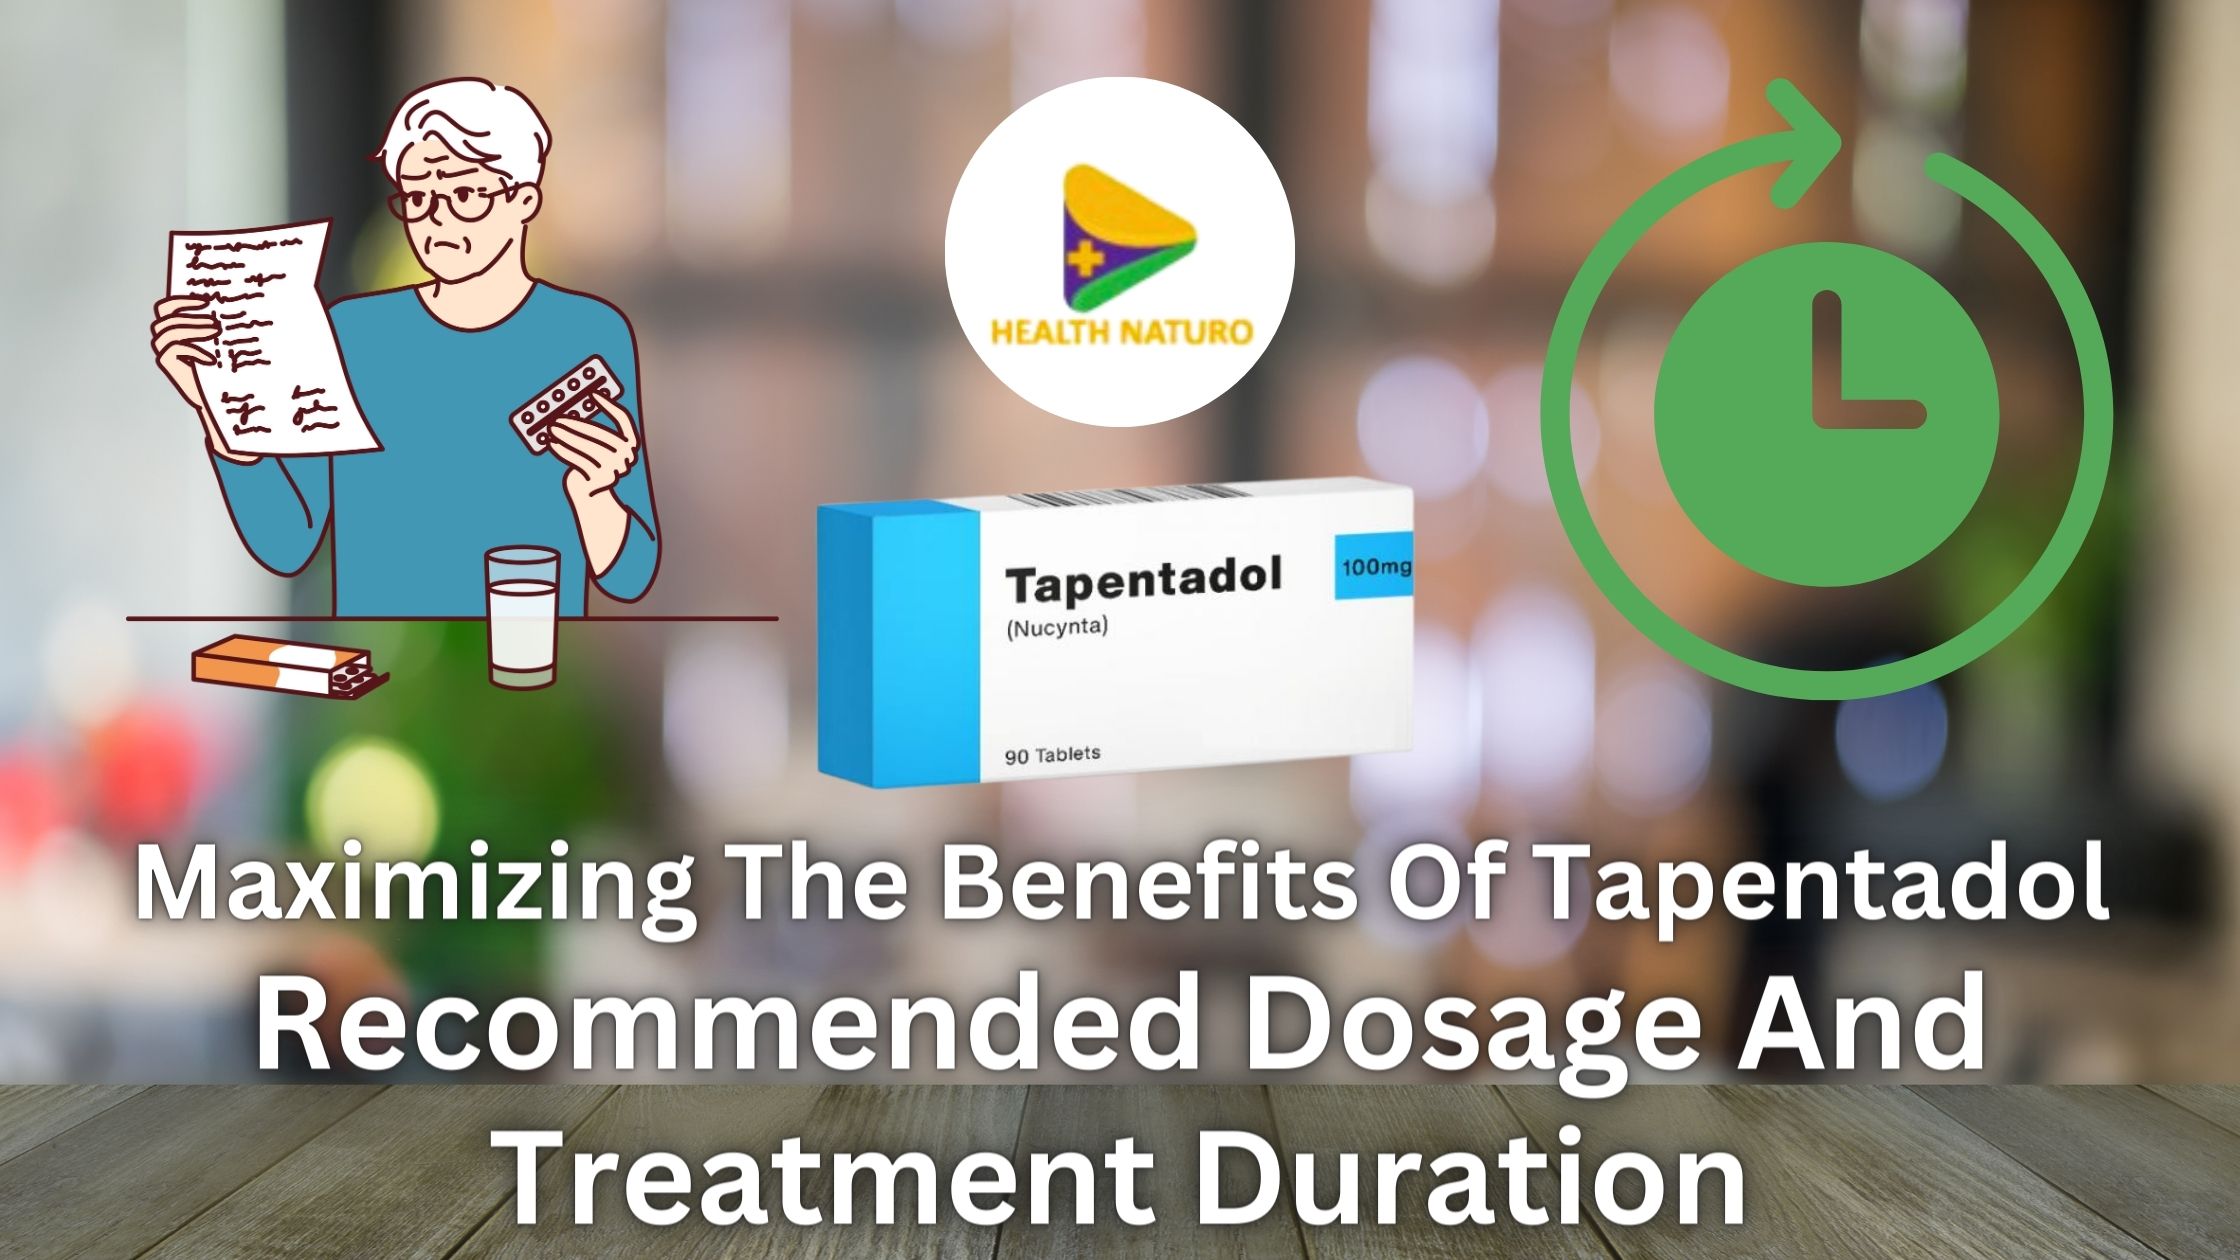 Maximizing The Benefits Of Tapentadol- Recommended Dosage And Treatment Duration